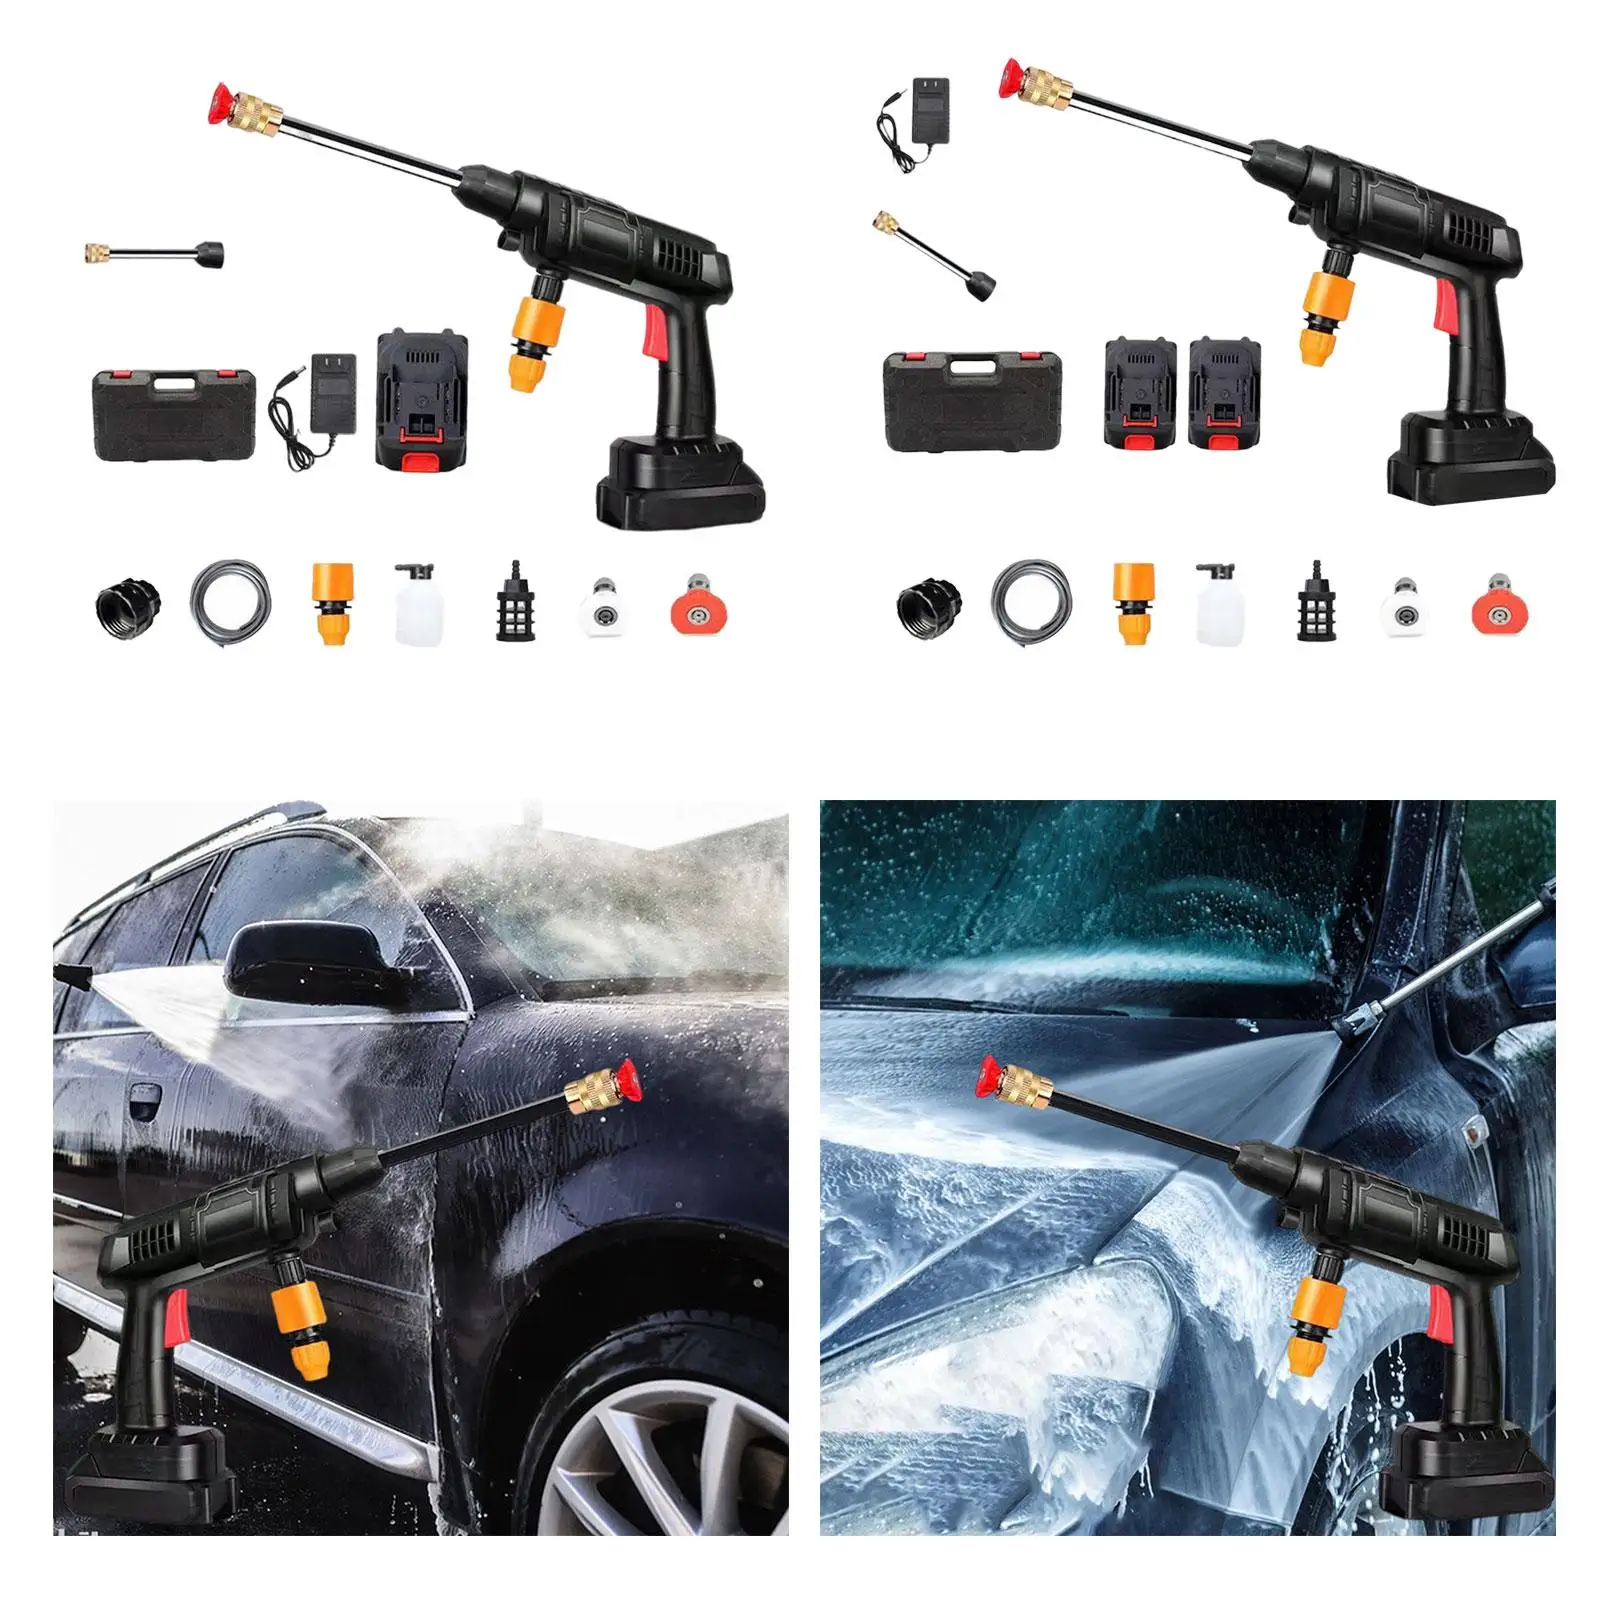 Water Spray Machine with Water Hose Foam Spray Bottle Fitting Cleaner High Pressure Washer for Driveways Car Home Washing Yard